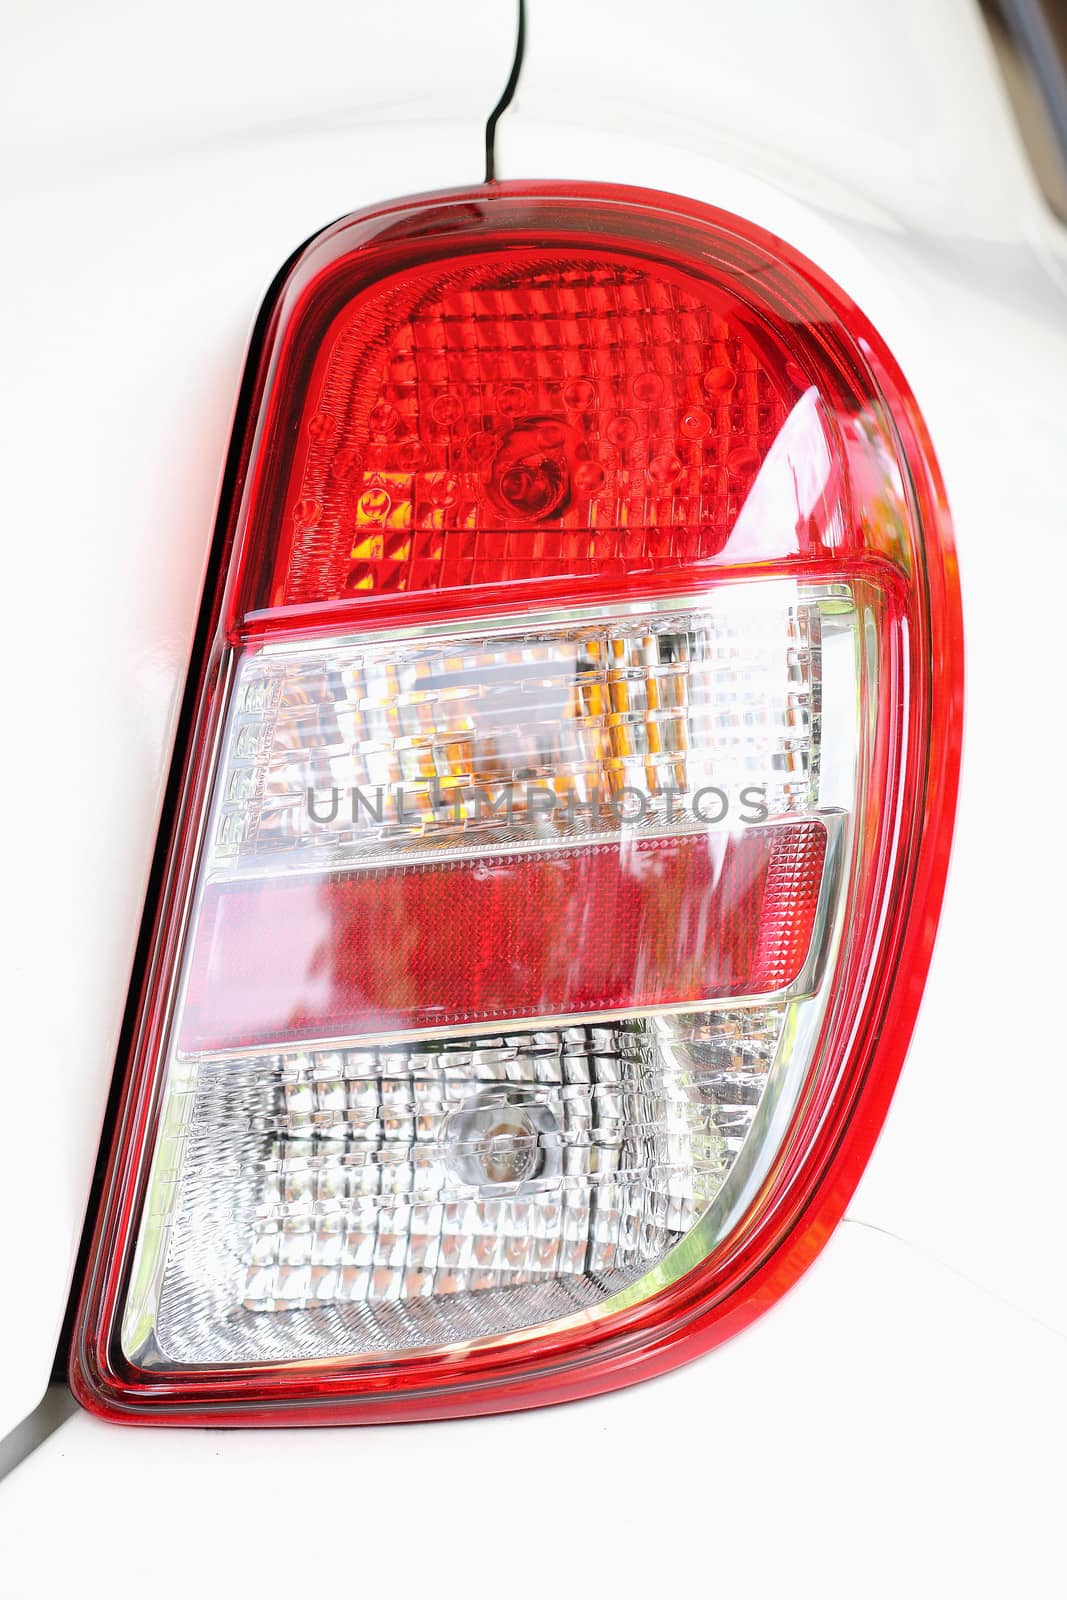 Tail light on the right car. by myrainjom01